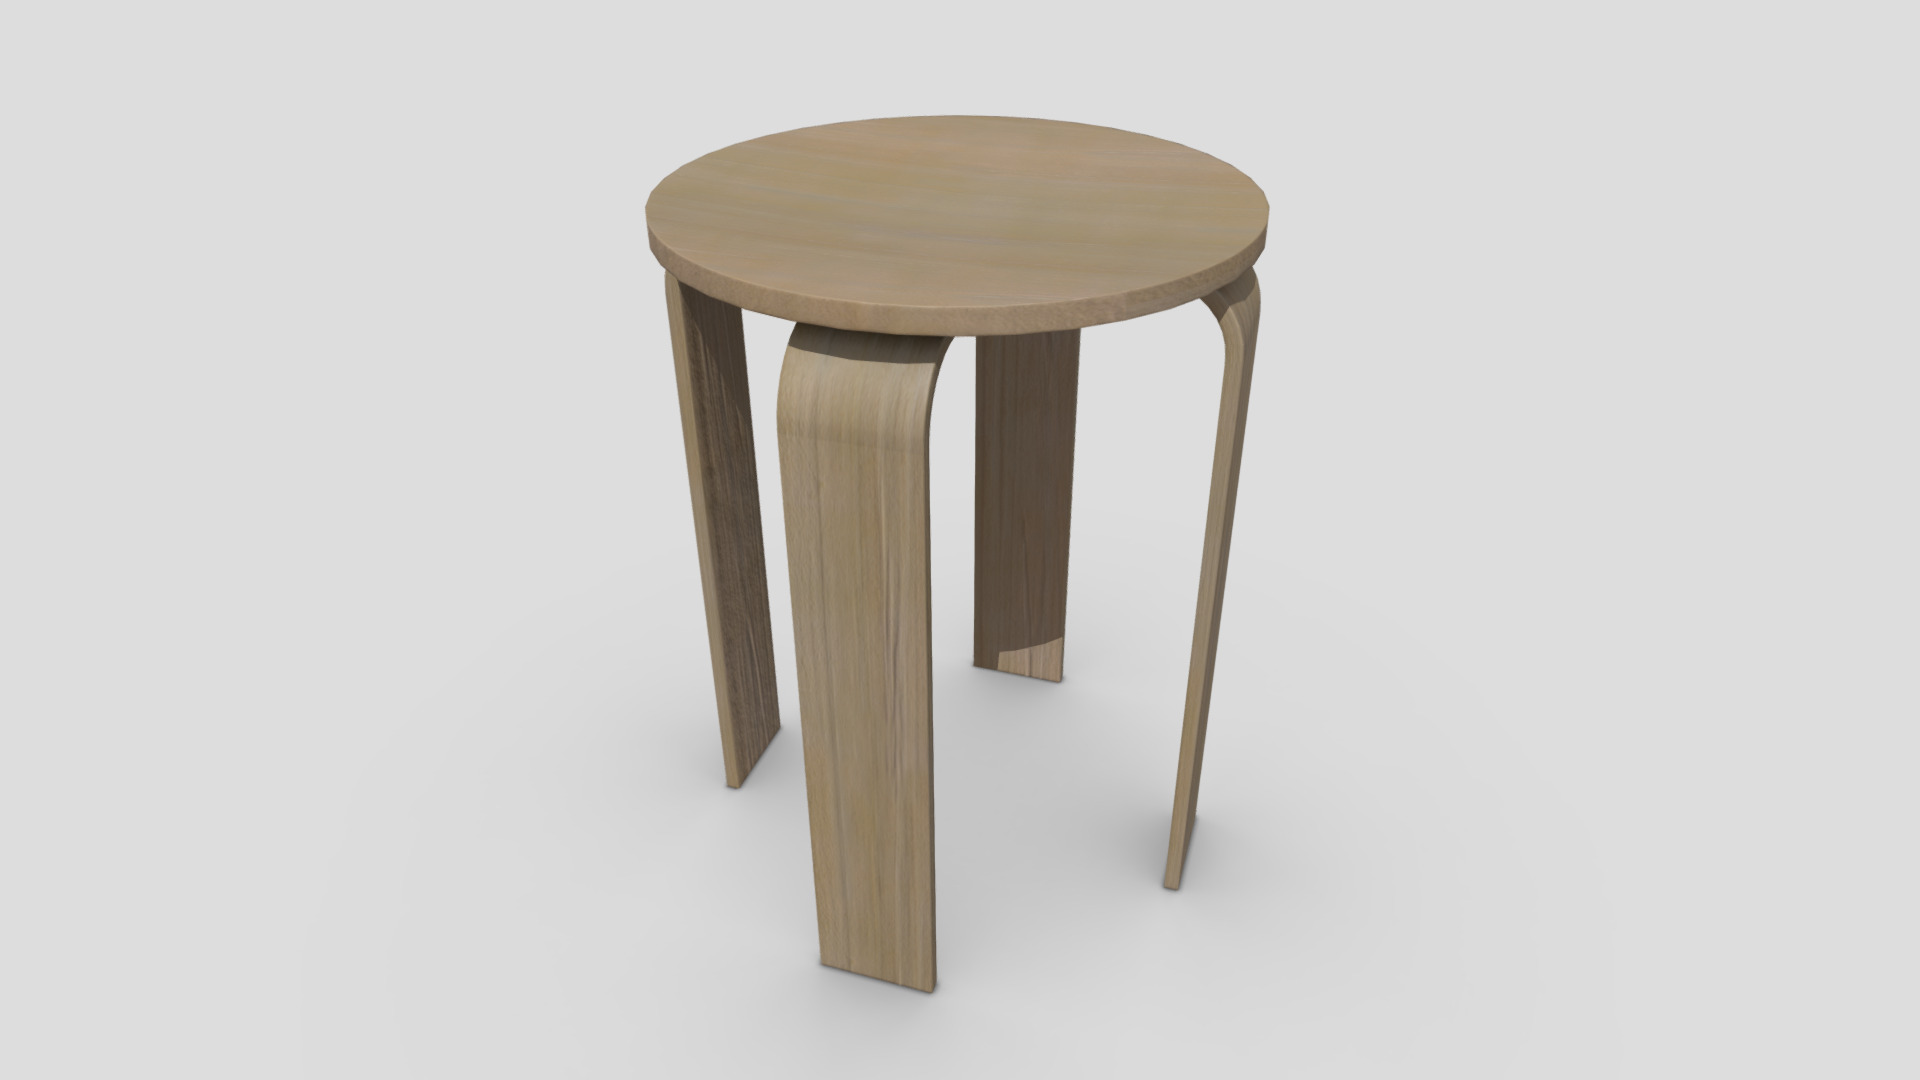 3D model Stool - This is a 3D model of the Stool. The 3D model is about a wooden stool on a white background.